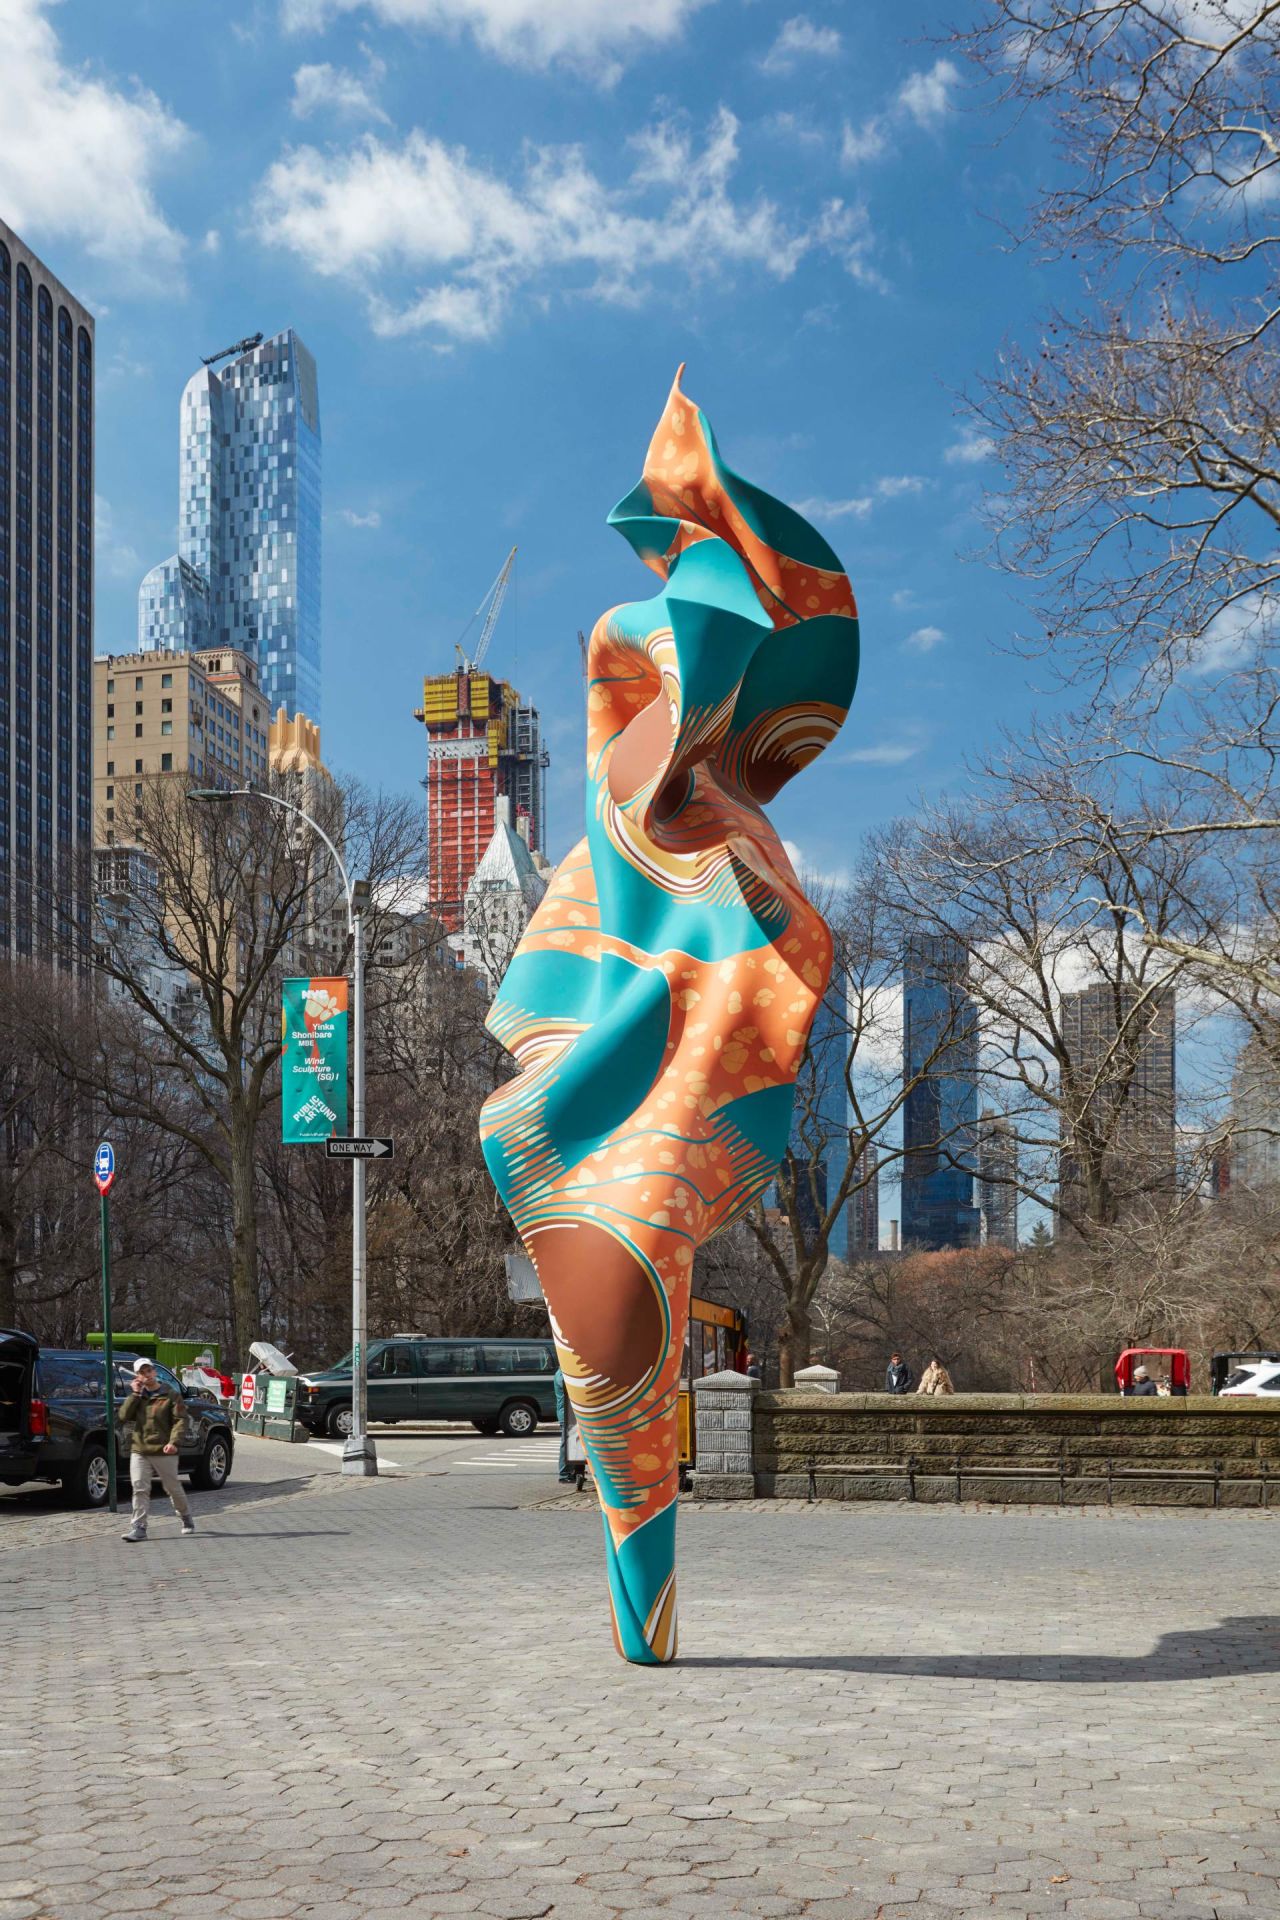 "Wind Sculpture (SG) I, 2018" displayed earlier this year in Central Park, New York. The artwork is part of "Wind" sculptures series looking at the layered relationships forged by centuries of global trade and migration.